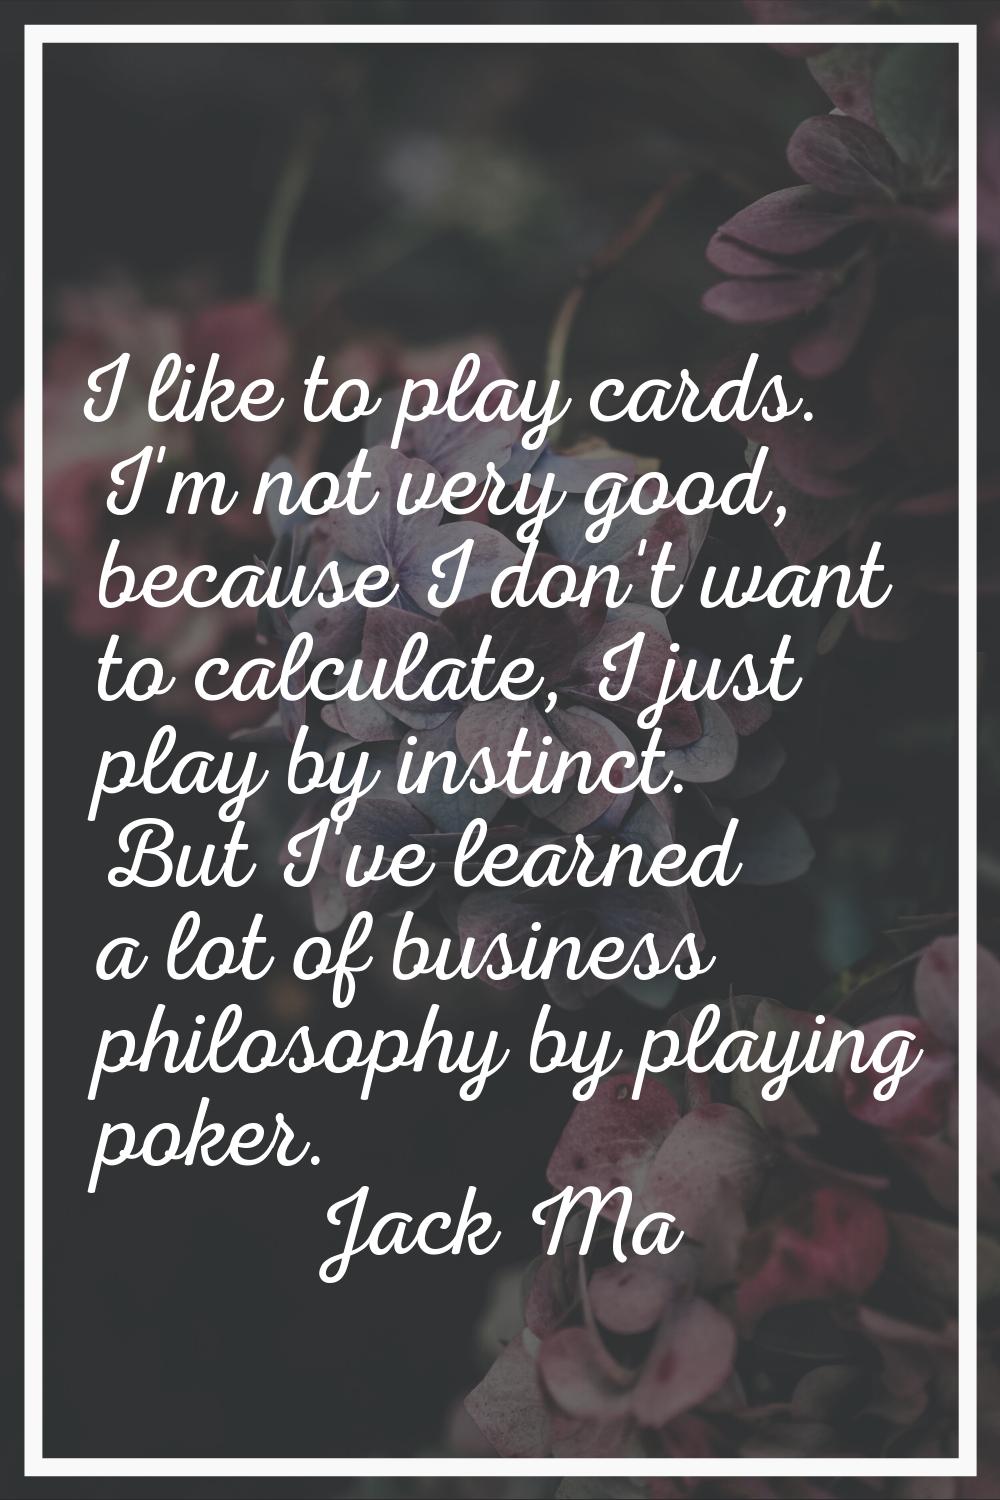 I like to play cards. I'm not very good, because I don't want to calculate, I just play by instinct